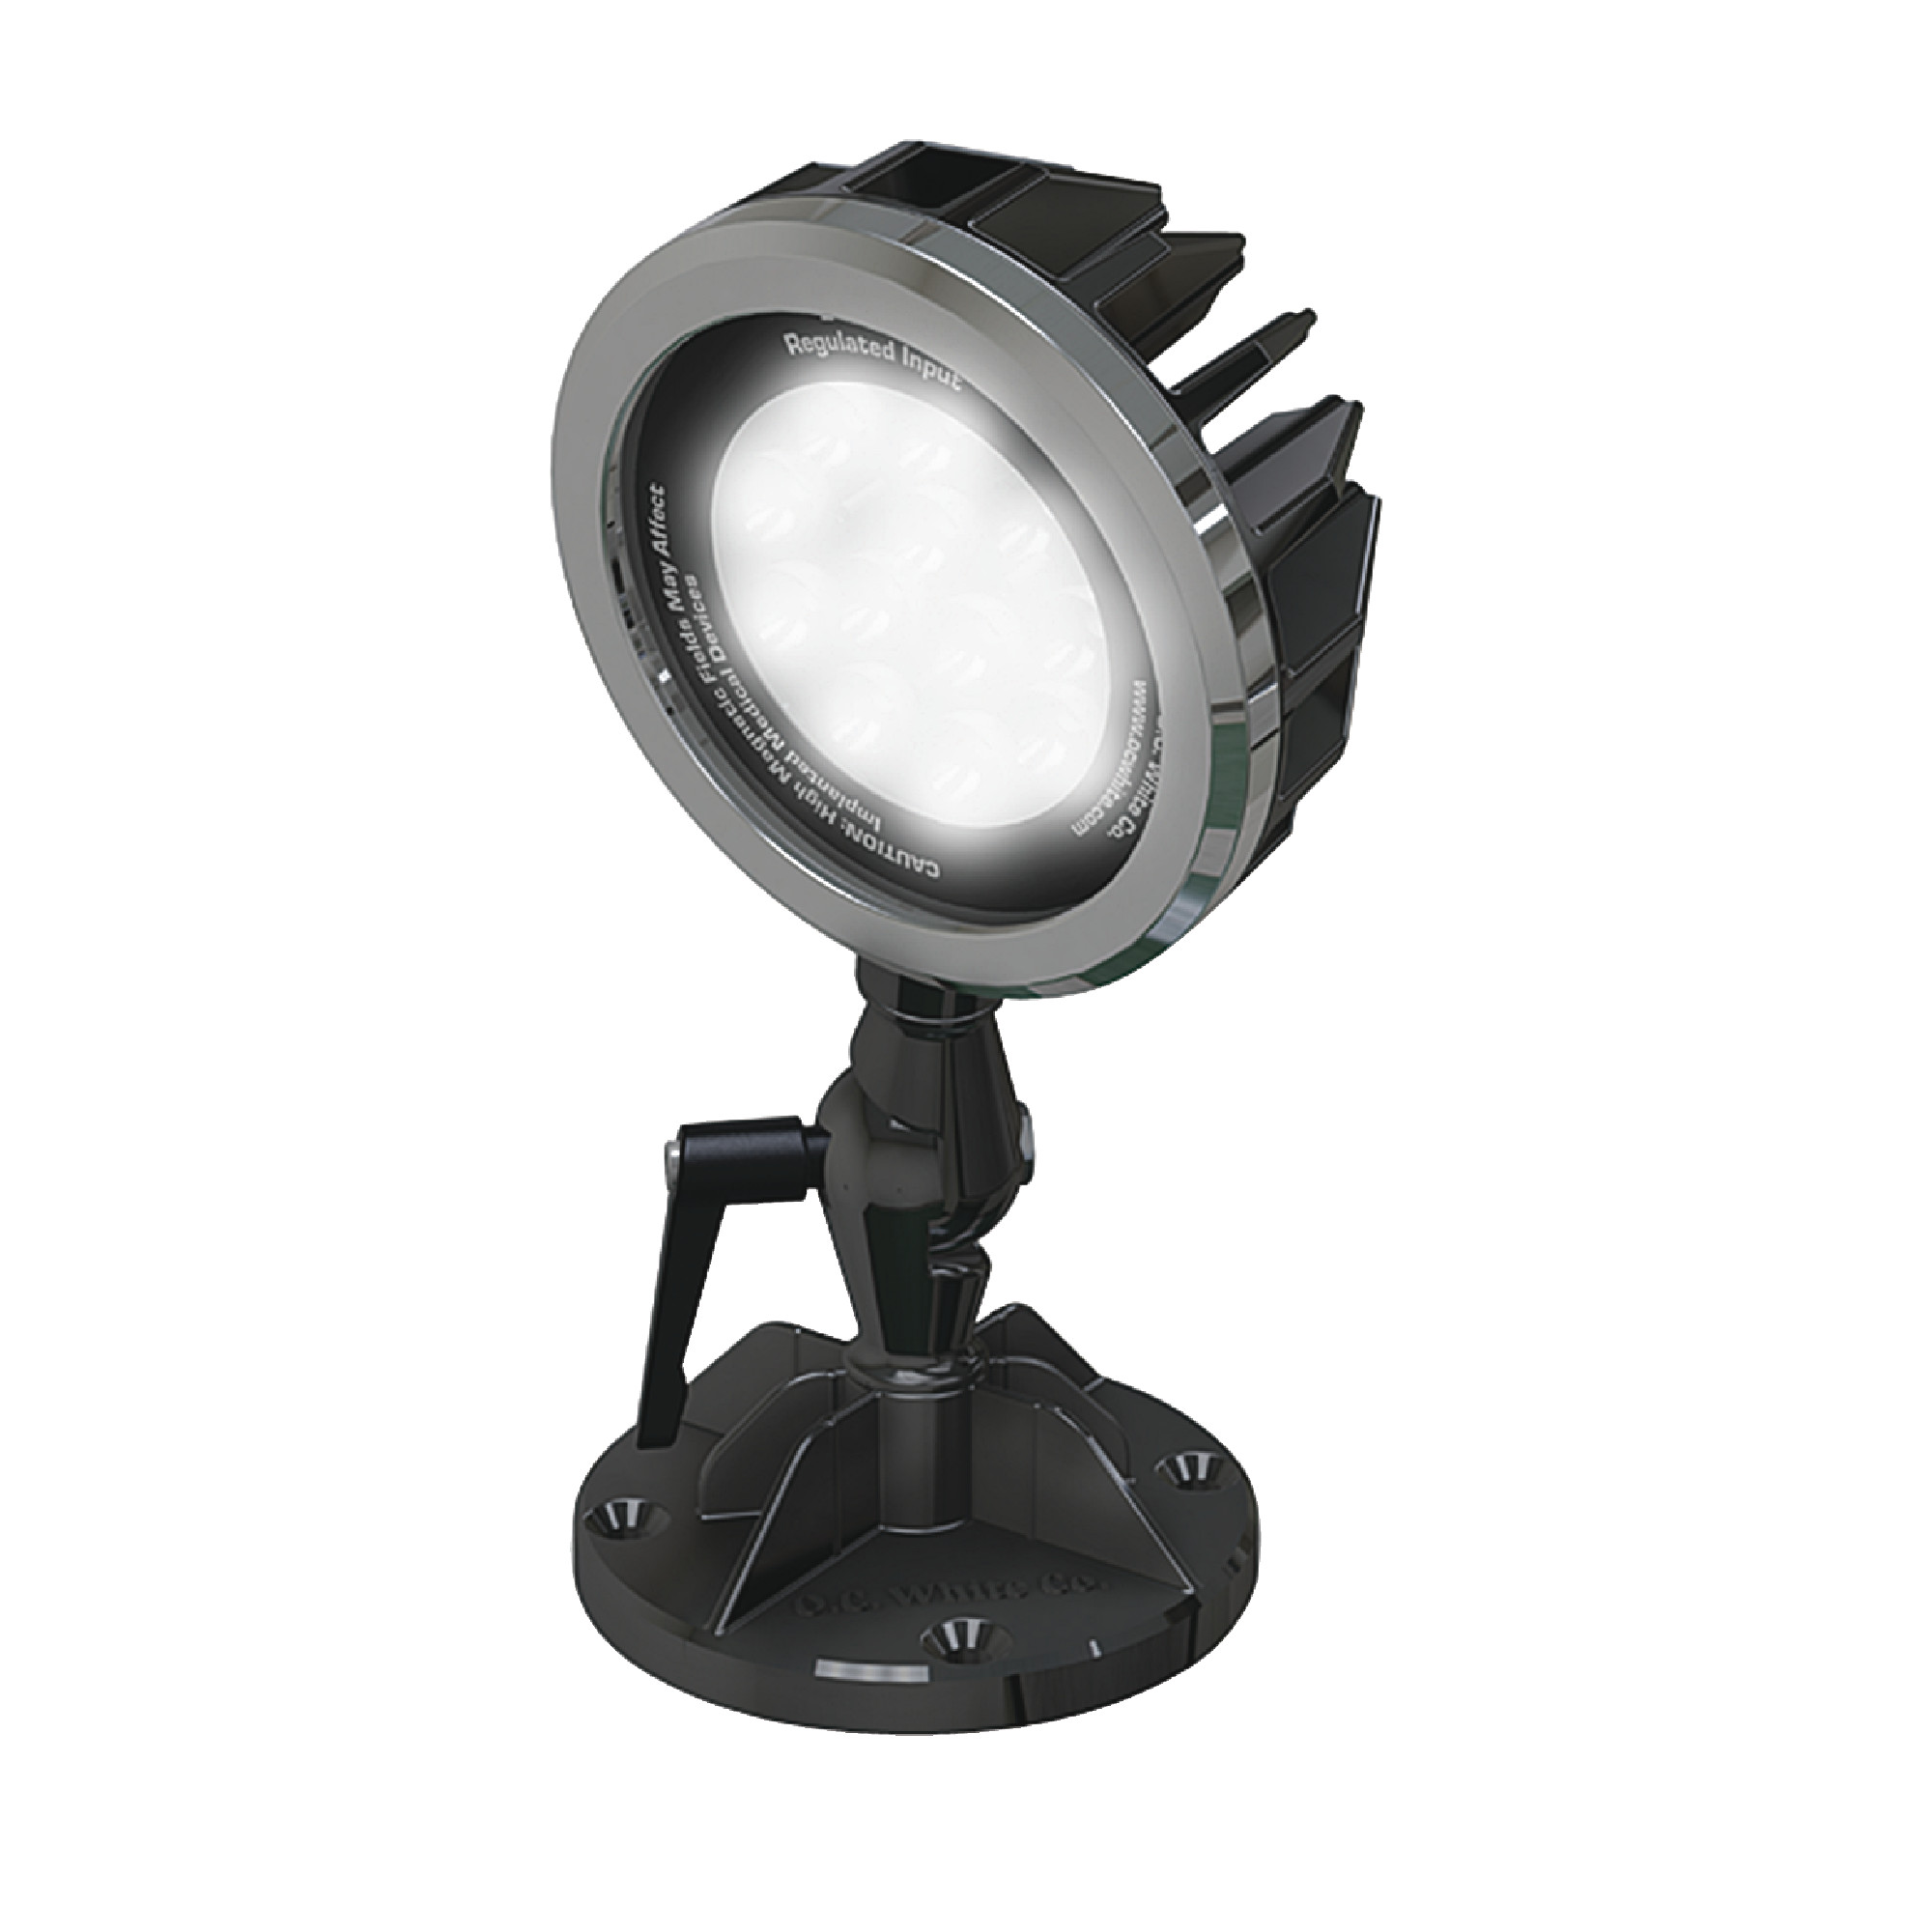 LED Machine Spotlight-Locking Die-cast Swivel Base Adjustable Screw Mount or Magnet with Built-in Dimming Switch